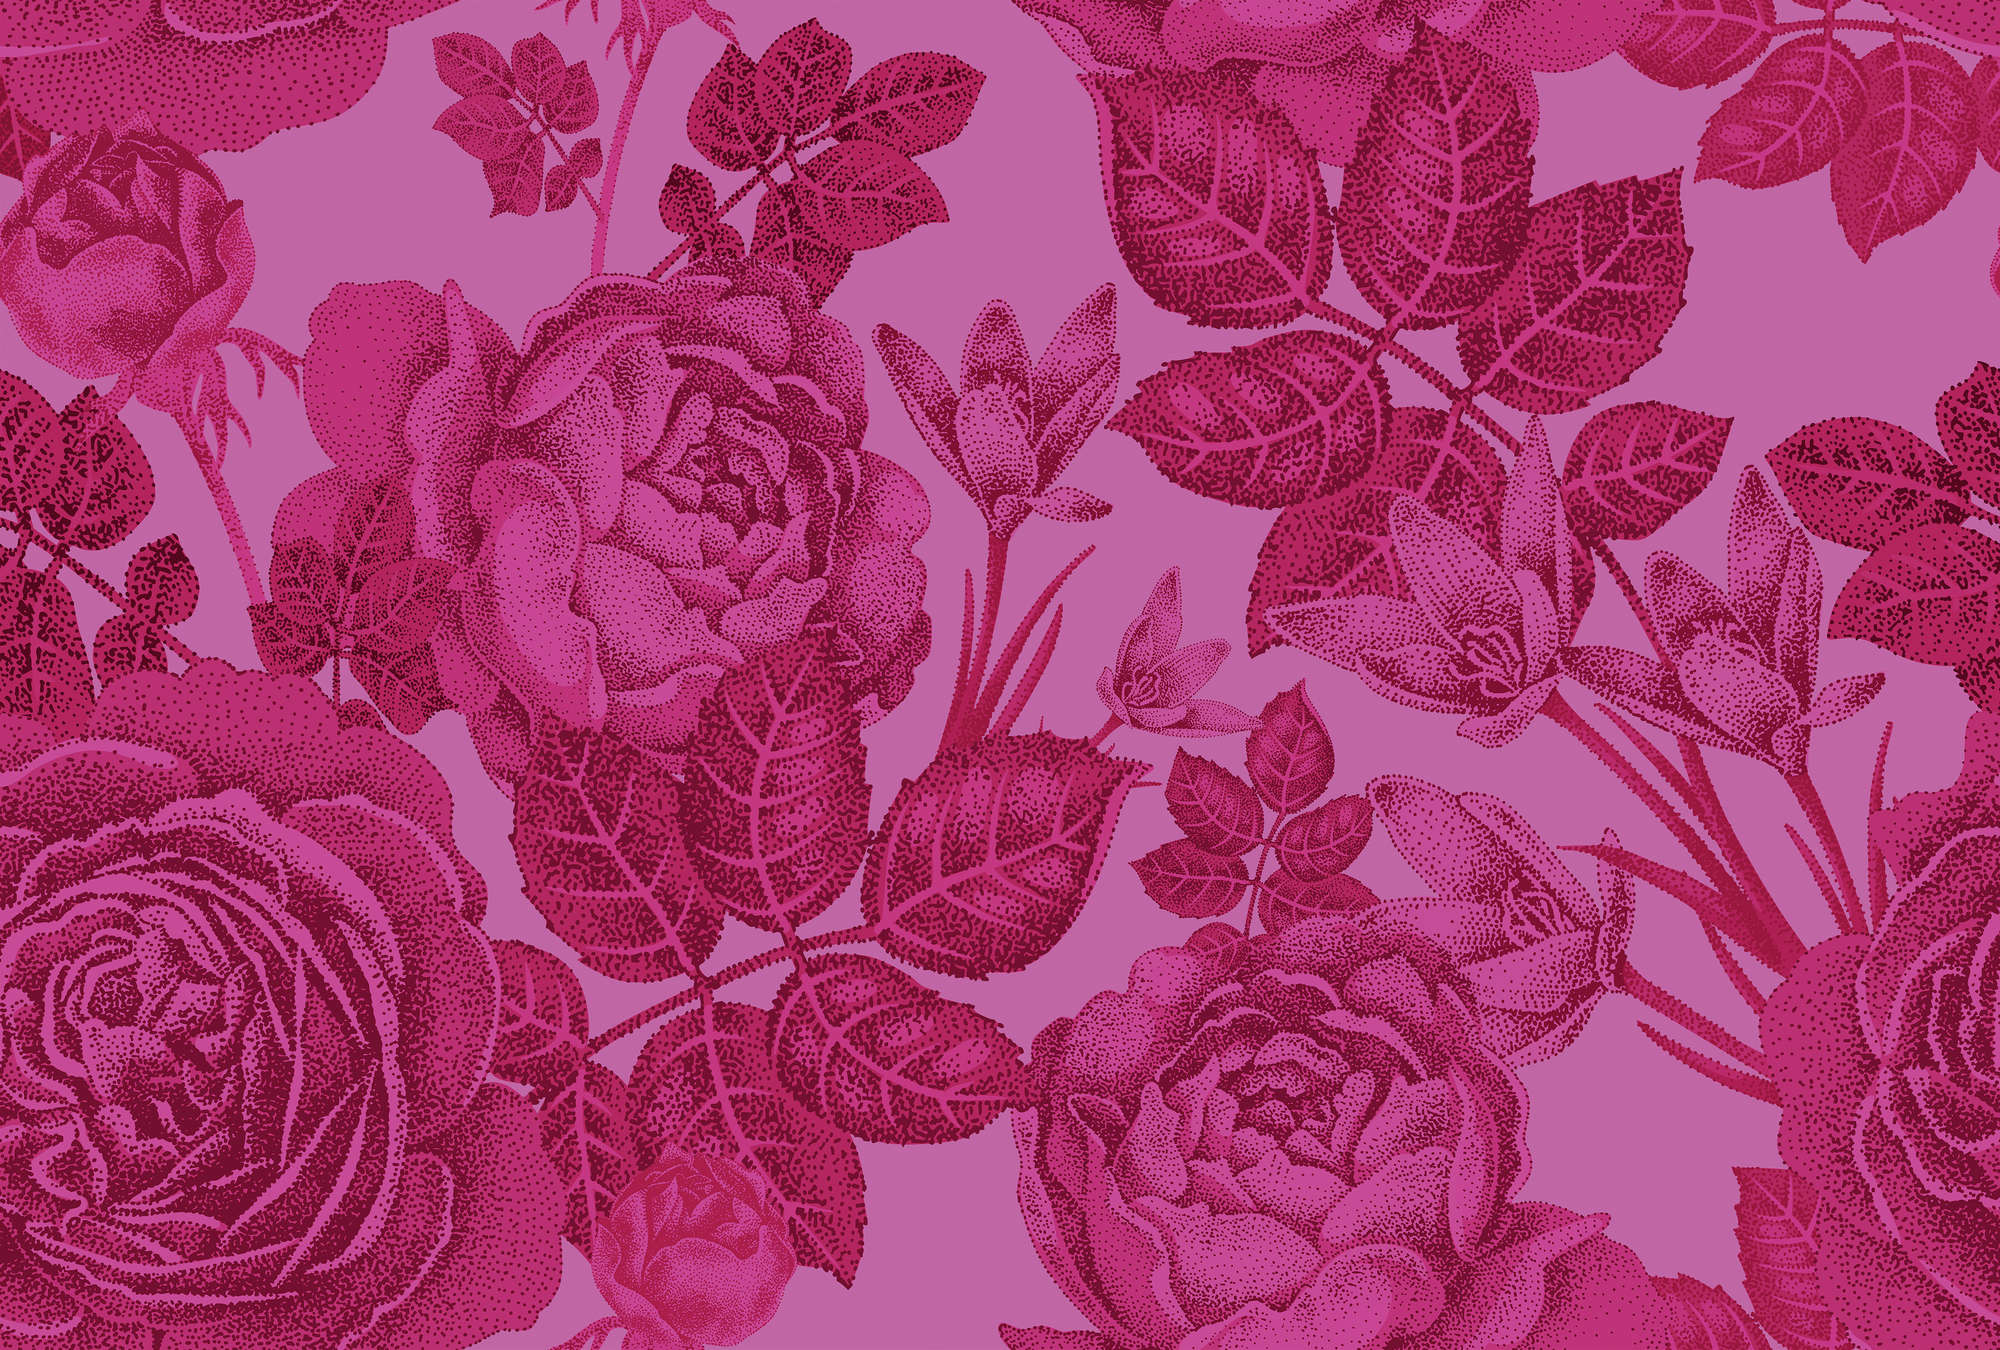             Floral mural roses on a bush - pink
        